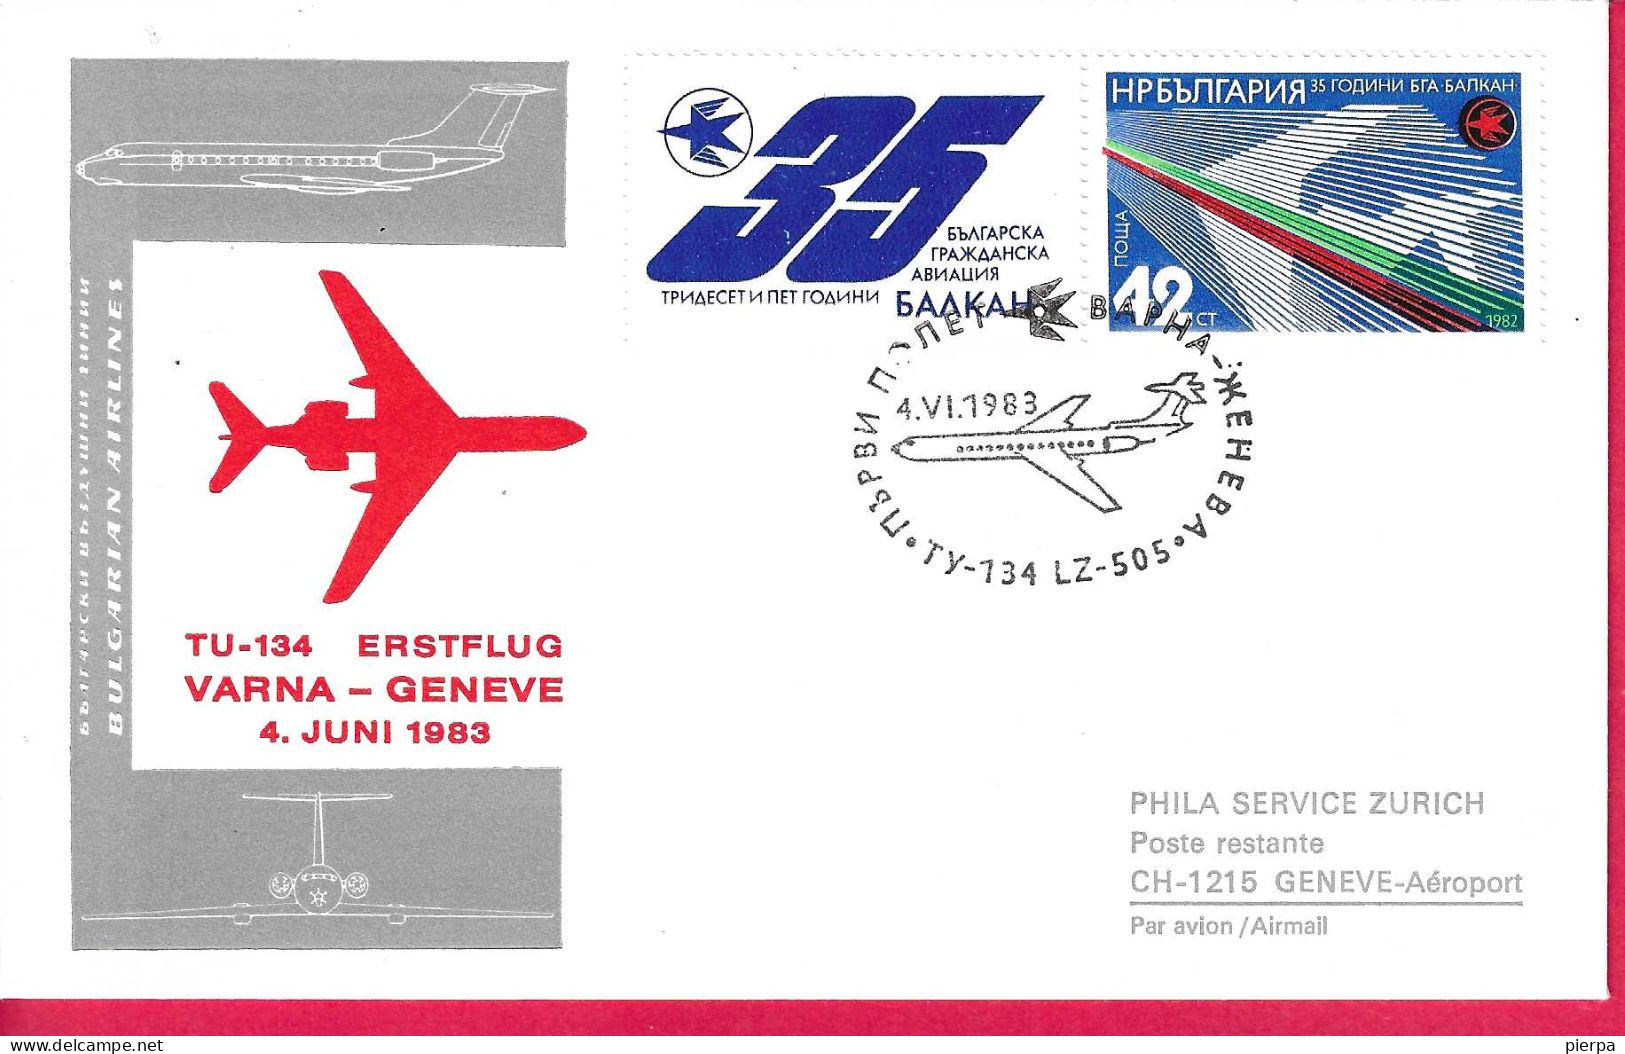 BULGARIA - FIRST FLIGHT TU-134 FROM VARNA TO GENEVE * 4.VI.1983* ON OFFICIAL COVER - Airmail